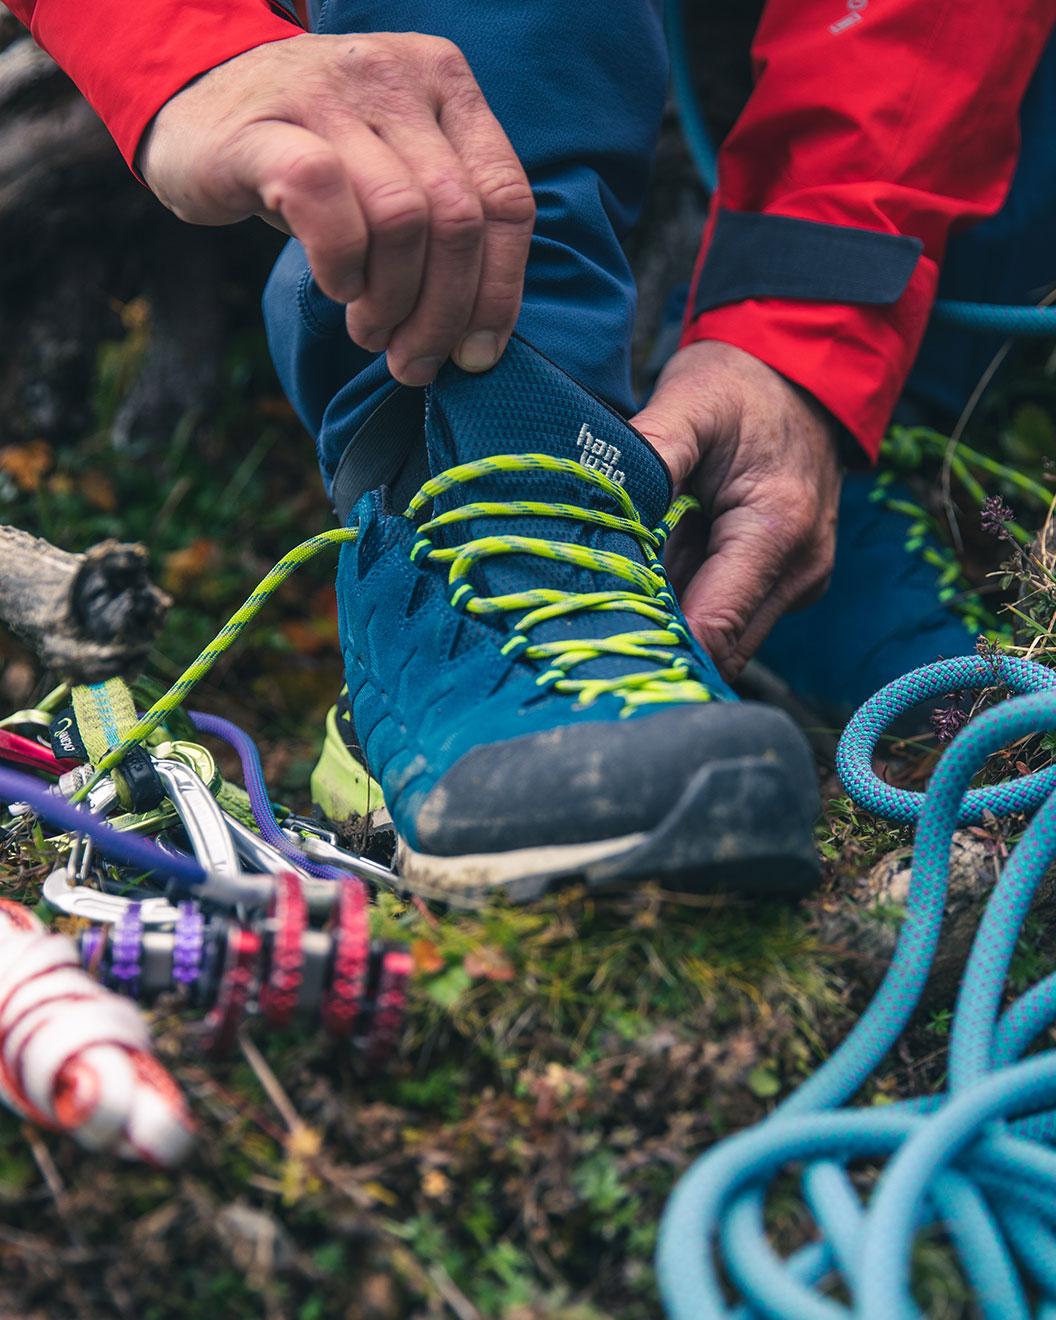 A mountaineer lacing the Hanwag Makra Pro Low GTX approach shoe